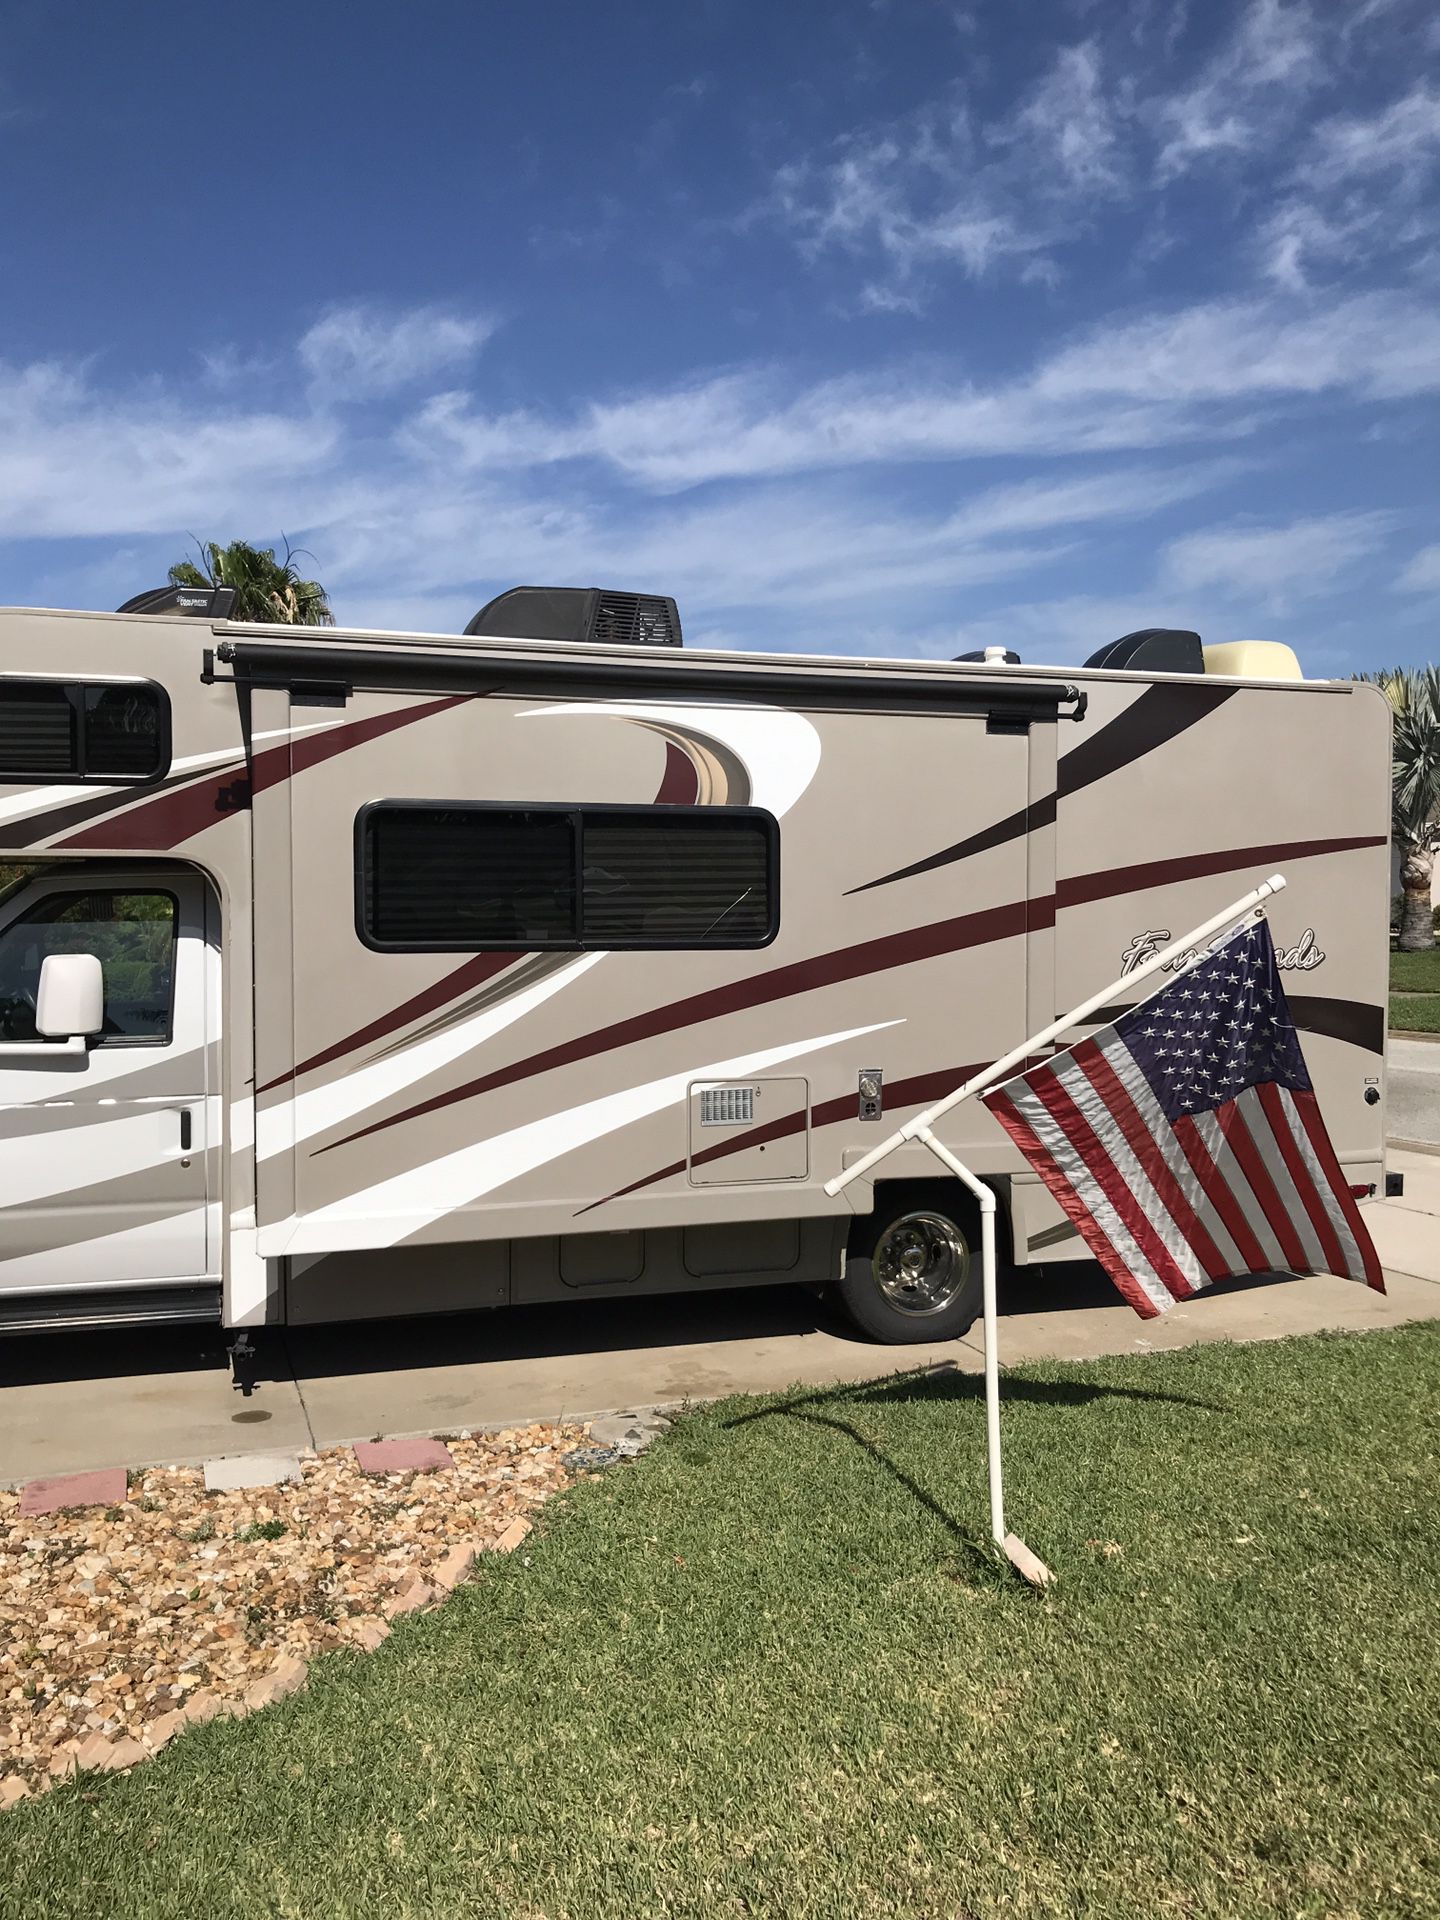 2015 Thor four winds motor coach. 24 ft. Like new condition. 45,300 or BEST OFFER